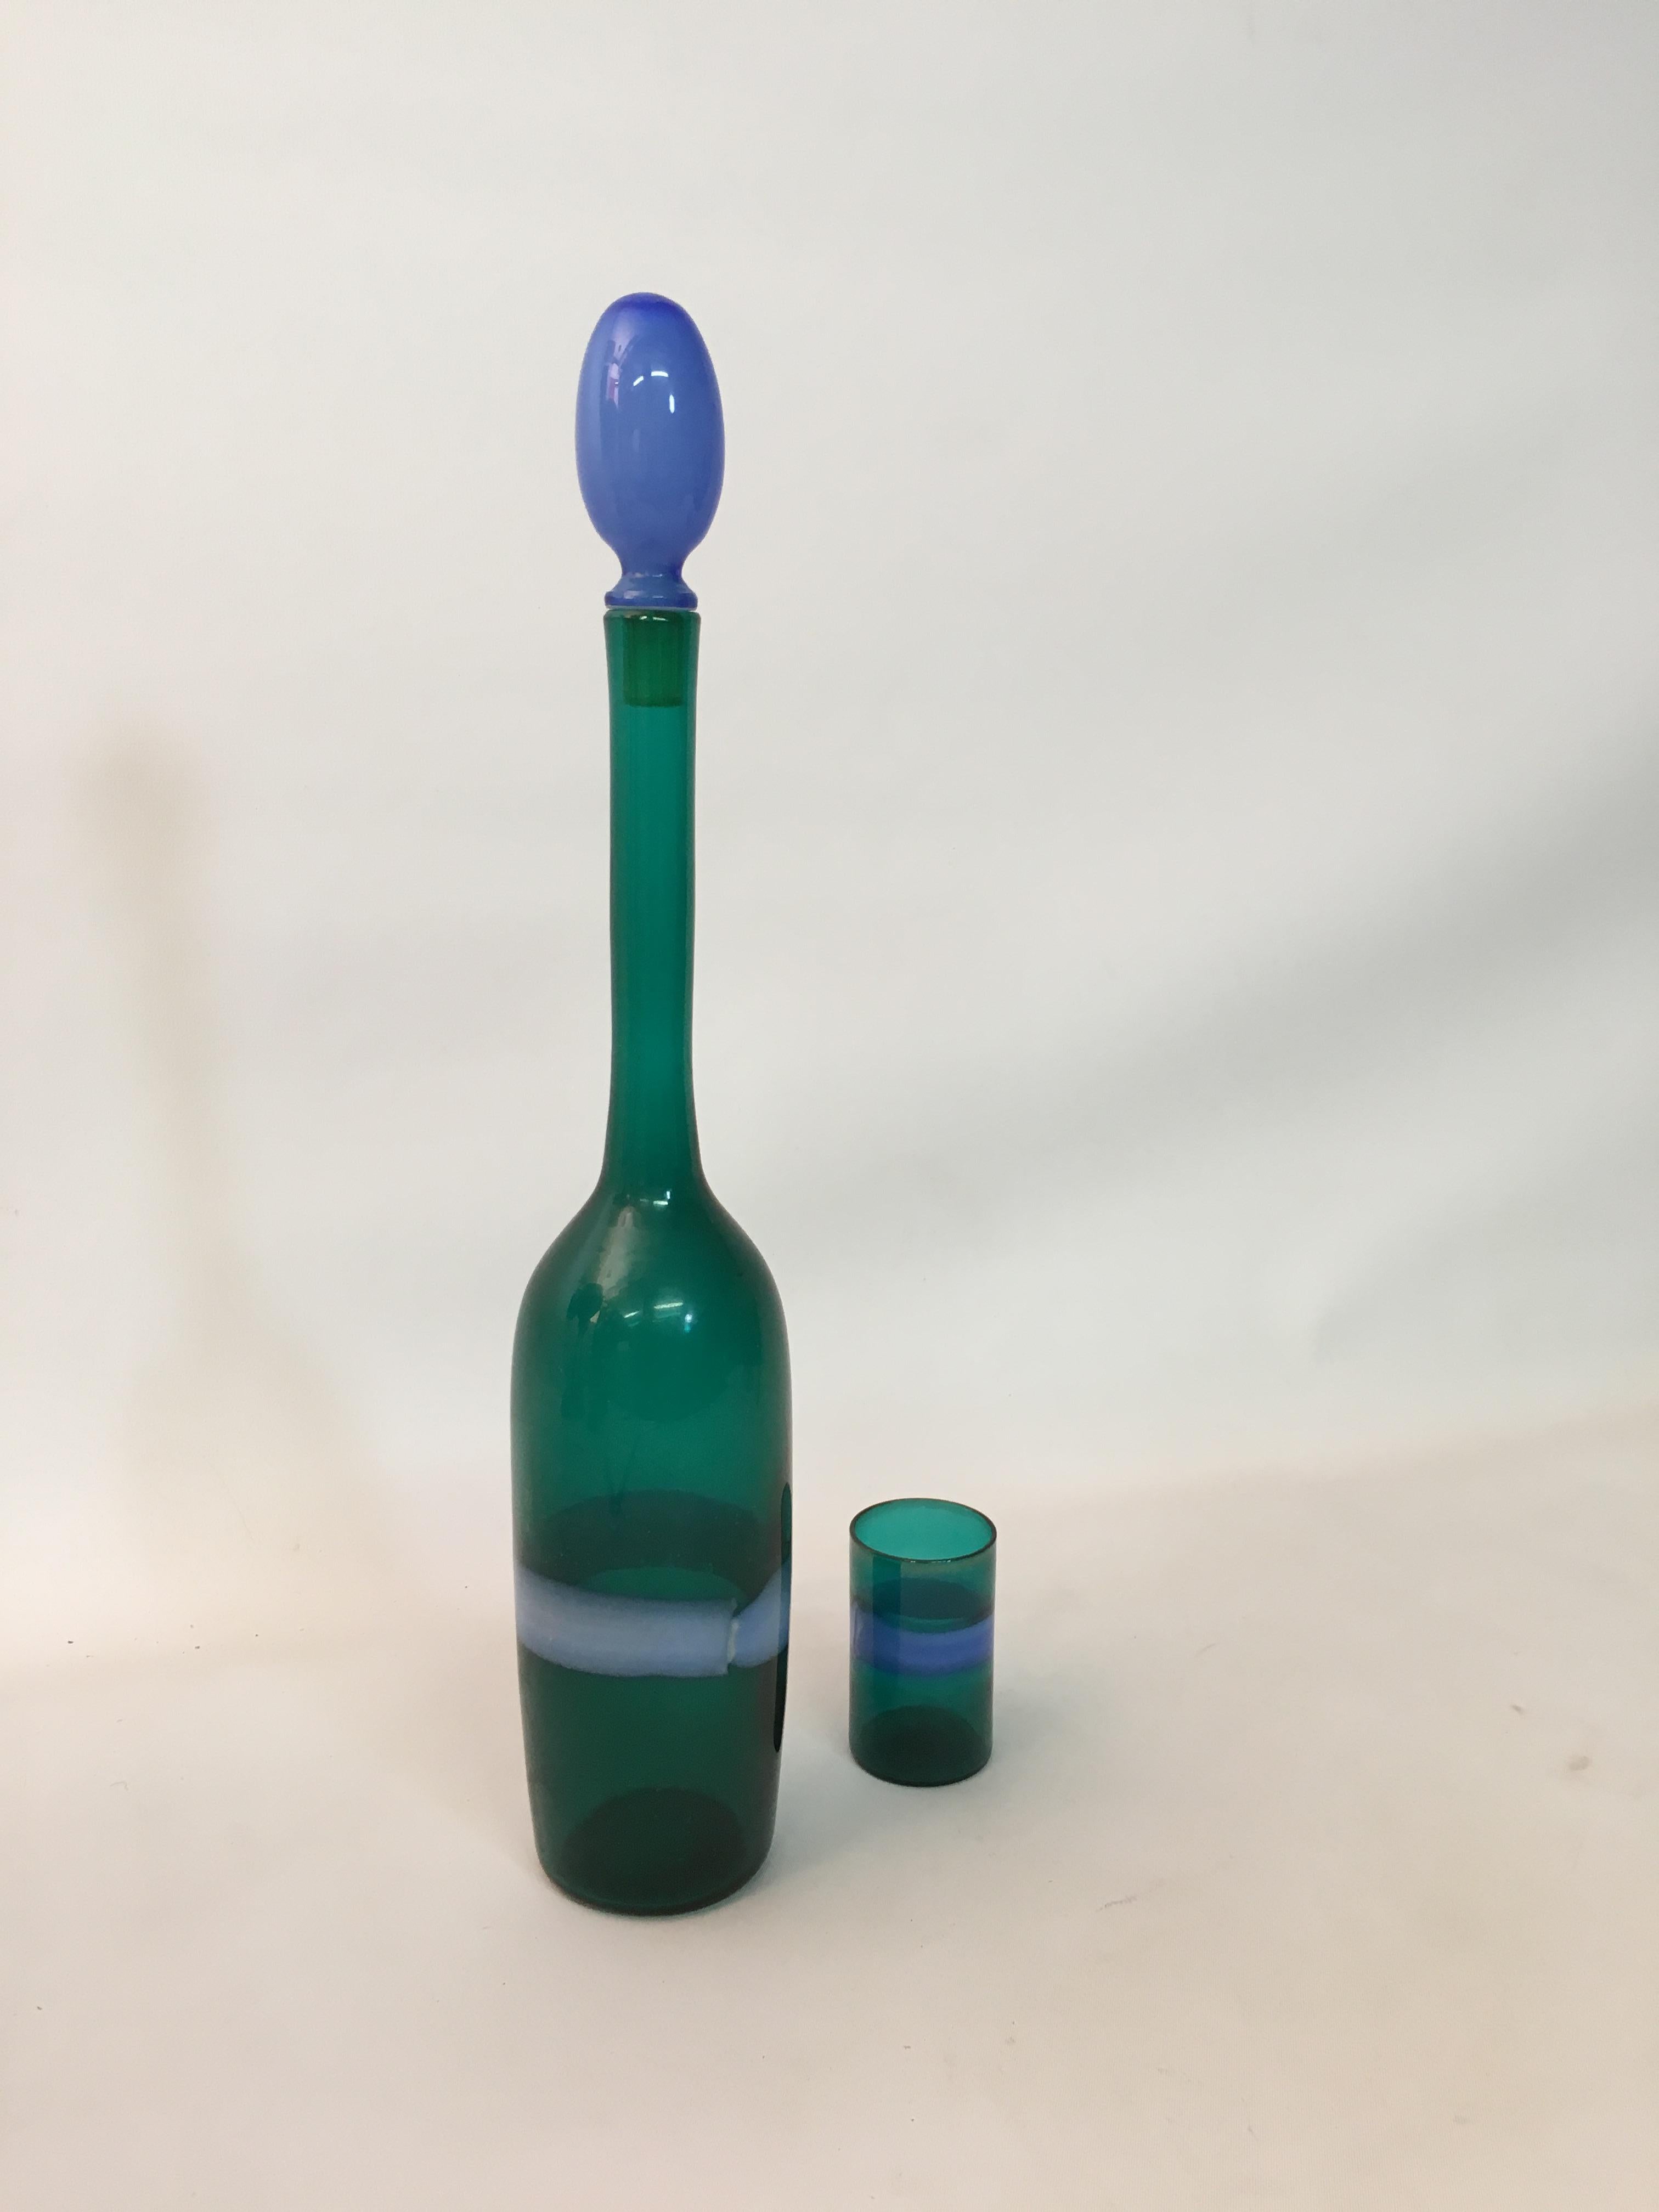 Elegant Italian design by master glassblower, Fulvio Bianconi for Venini, circa 1955. Incalmo glass decanter bottle with a small cordial glass. Both pieces are signed with Venini paper labels. The stopper is an azure blue and the bottle body is a